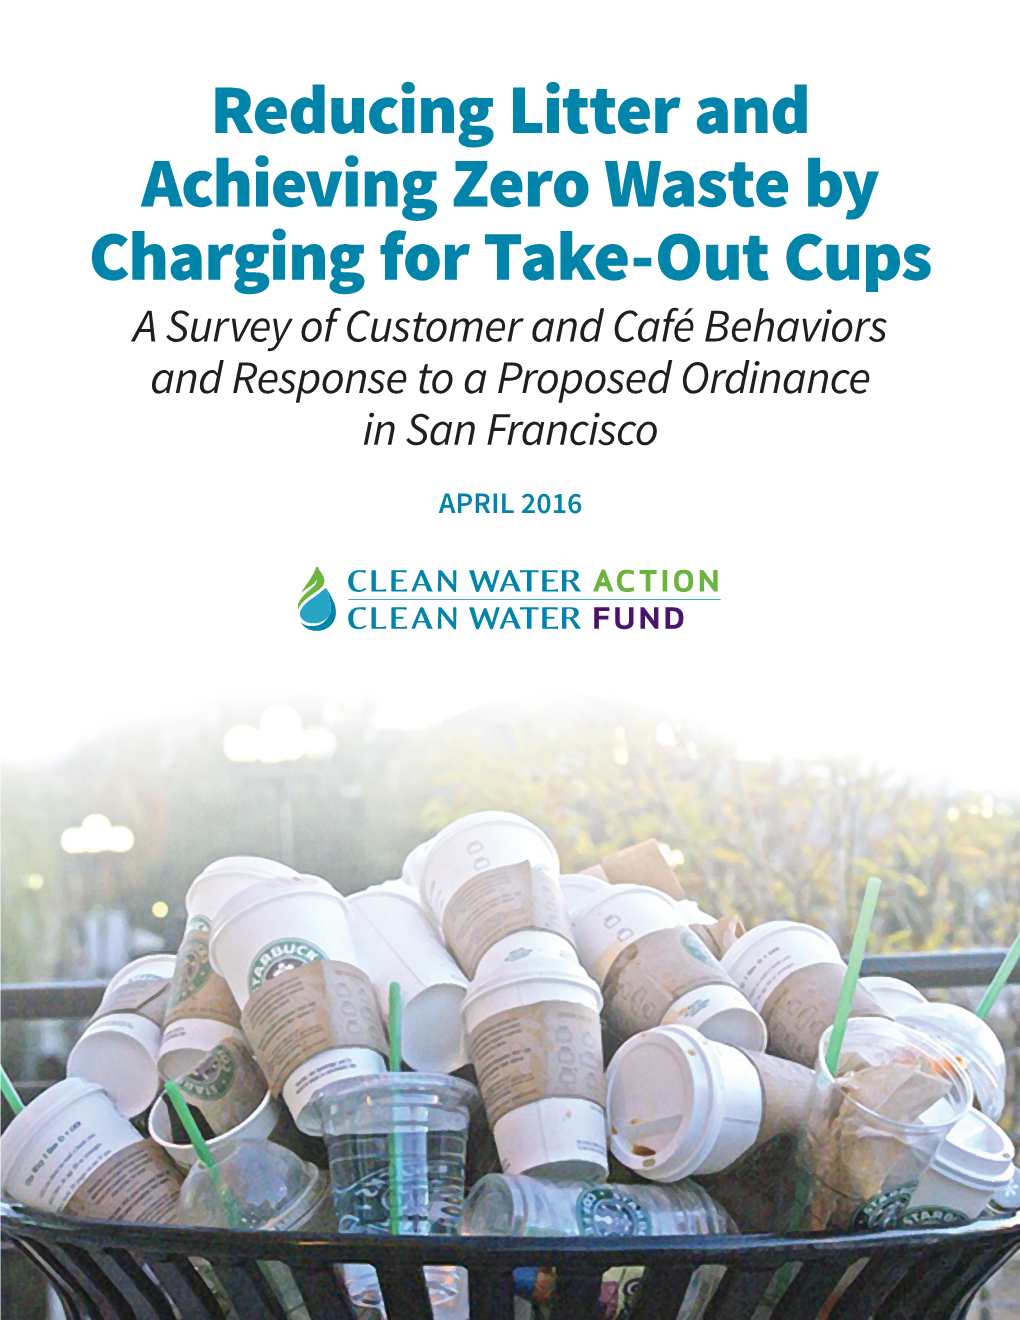 Reducing Litter and Achieving Zero Waste by Charging for Take-Out Cups a Survey of Customer and Café Behaviors and Response to a Proposed Ordinance in San Francisco